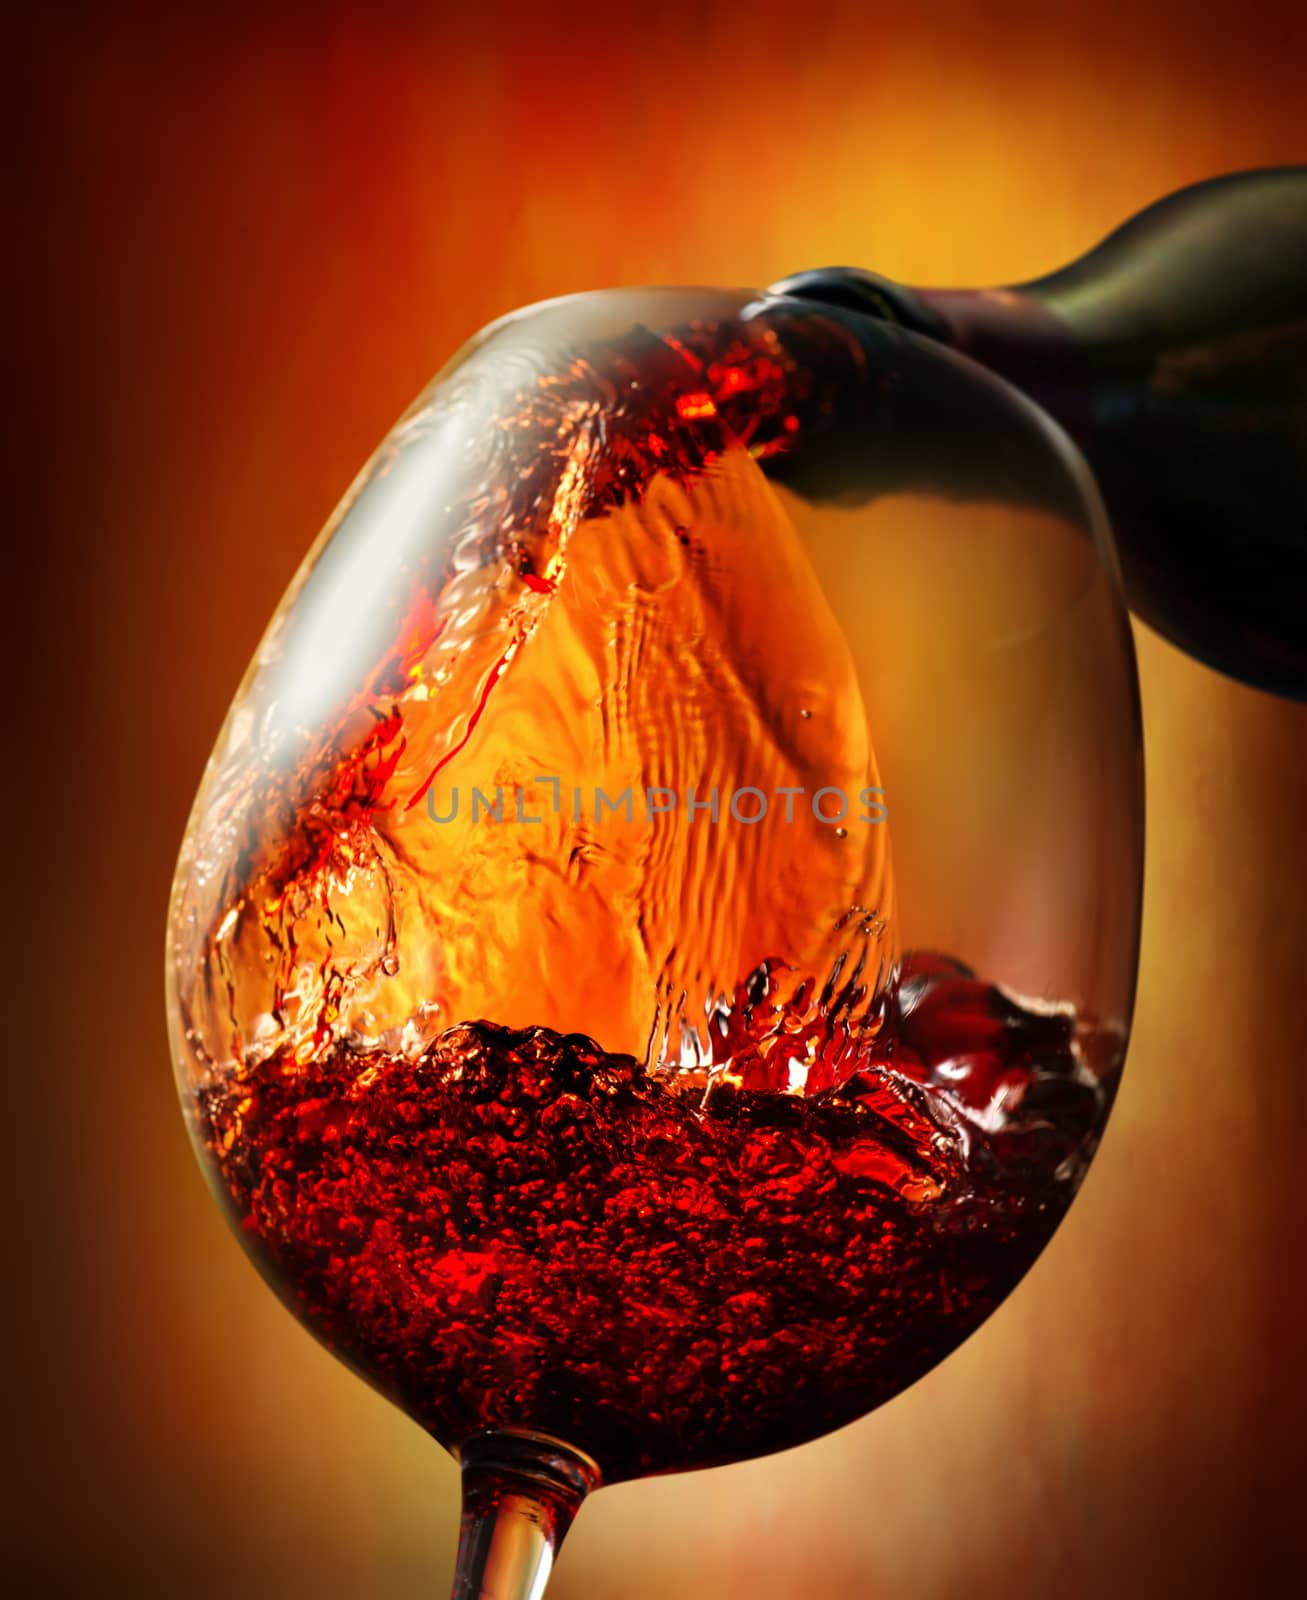 Red wine on an orange background by Givaga